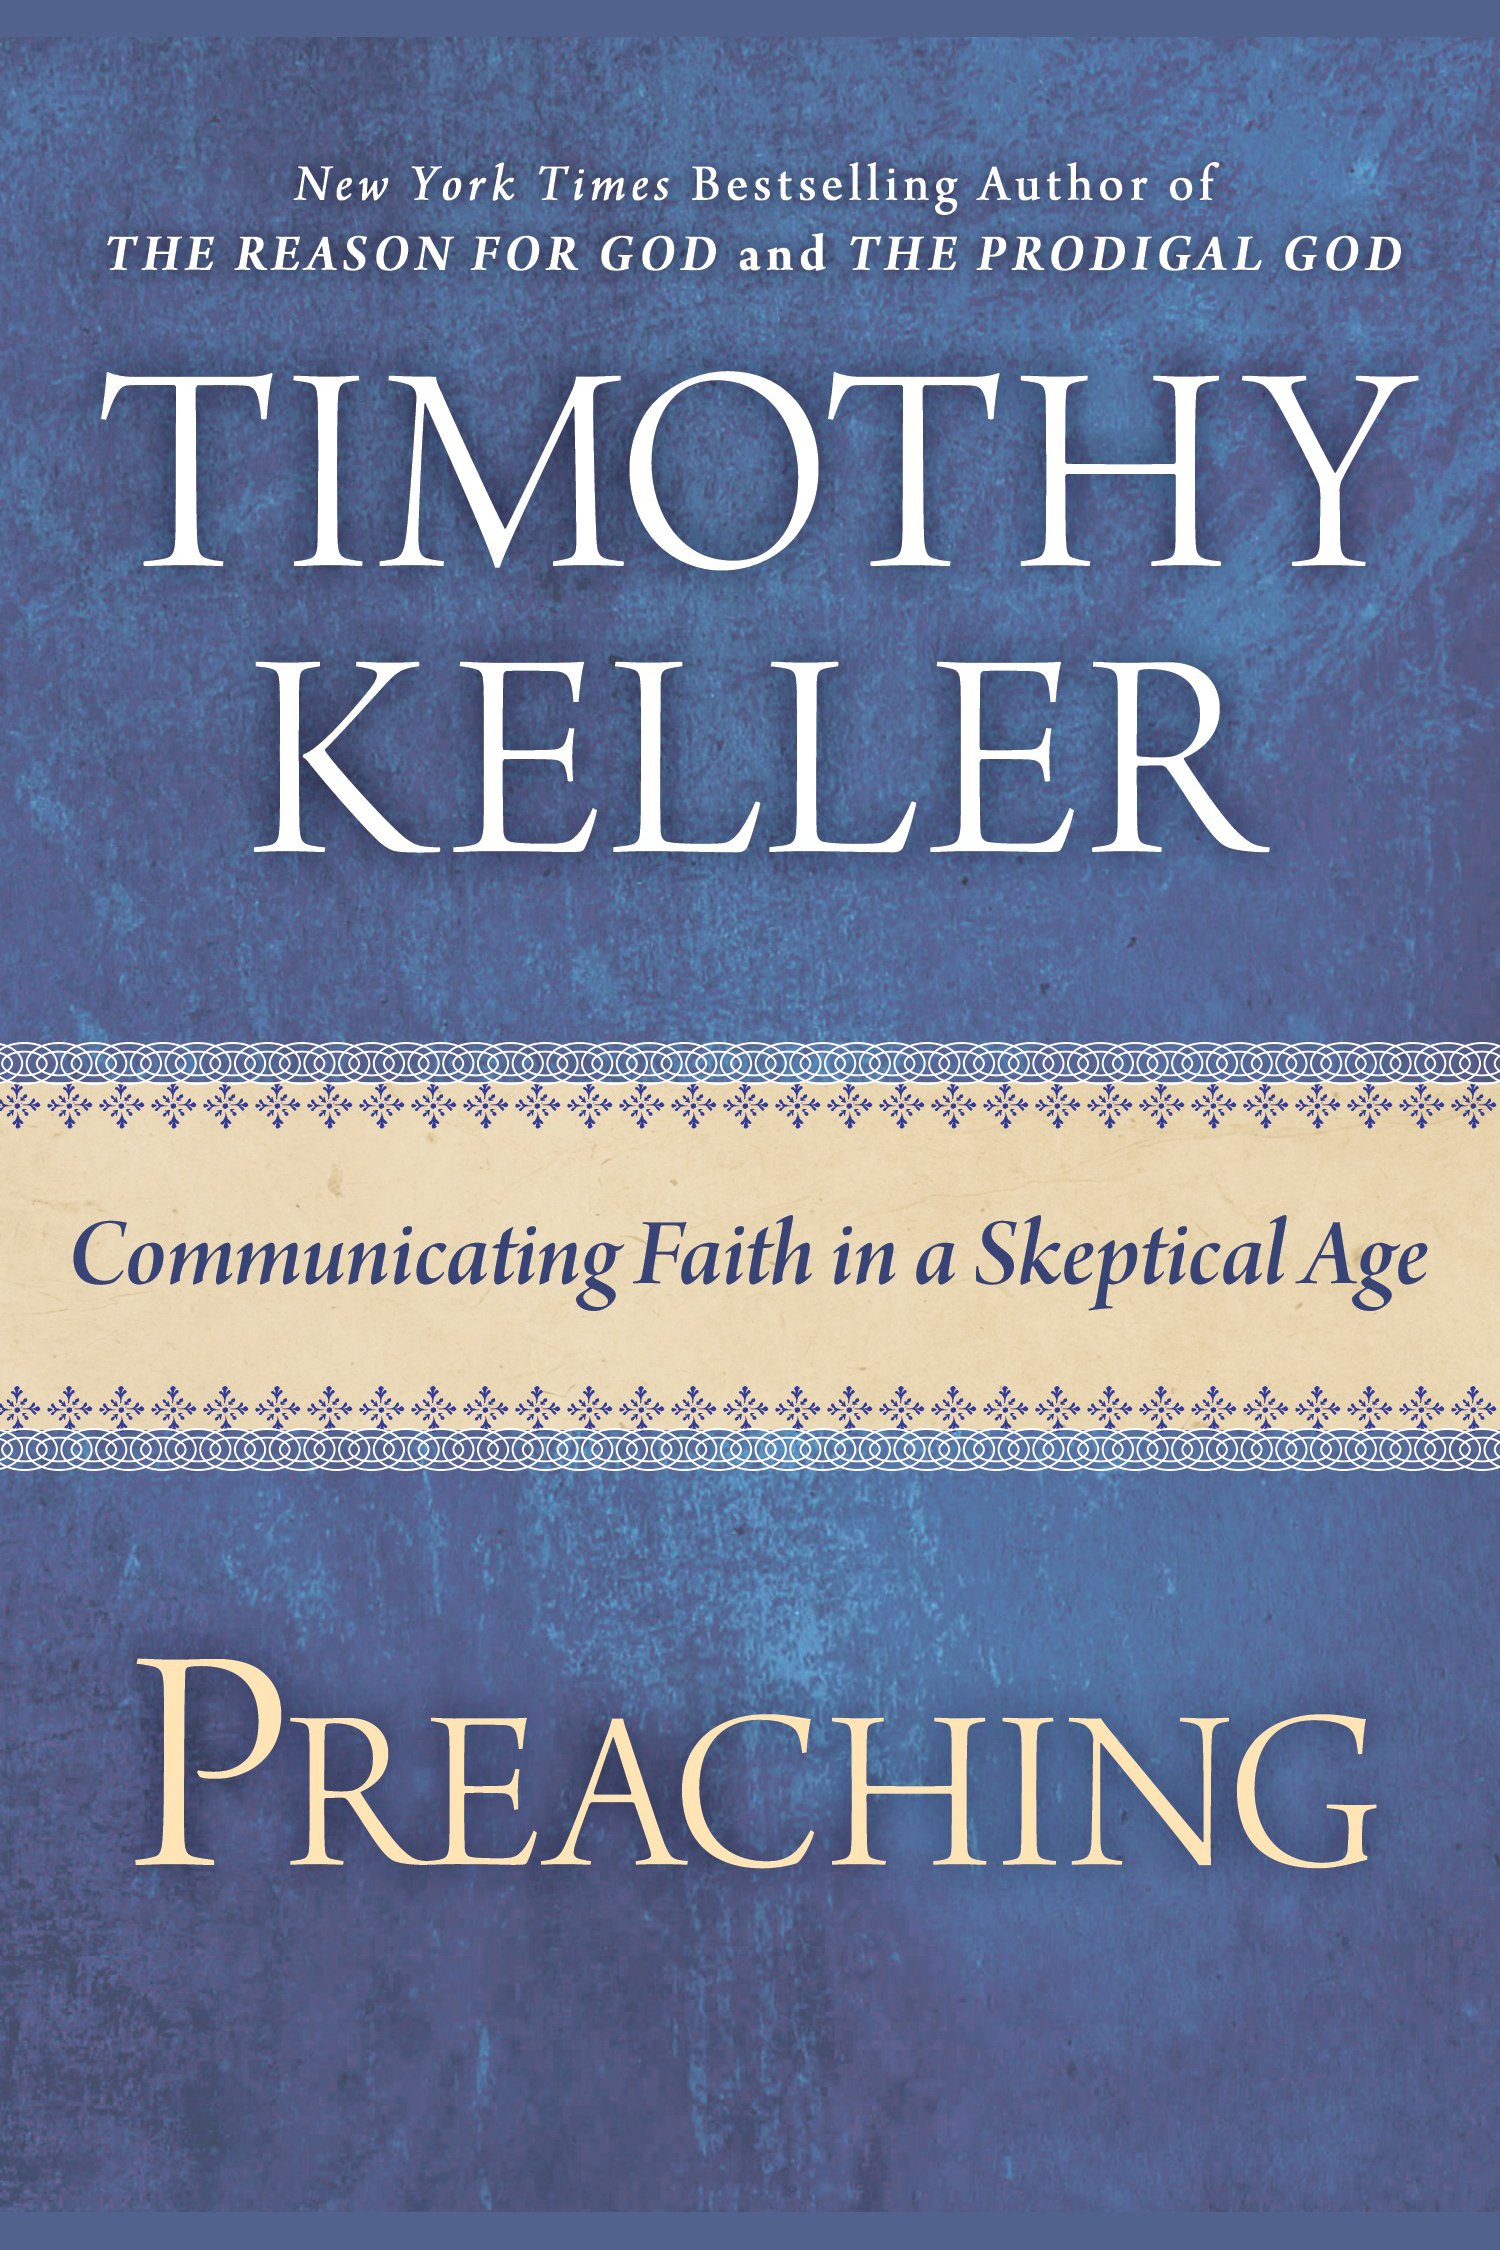 Preaching communicating faith in an age of skepticism cover image